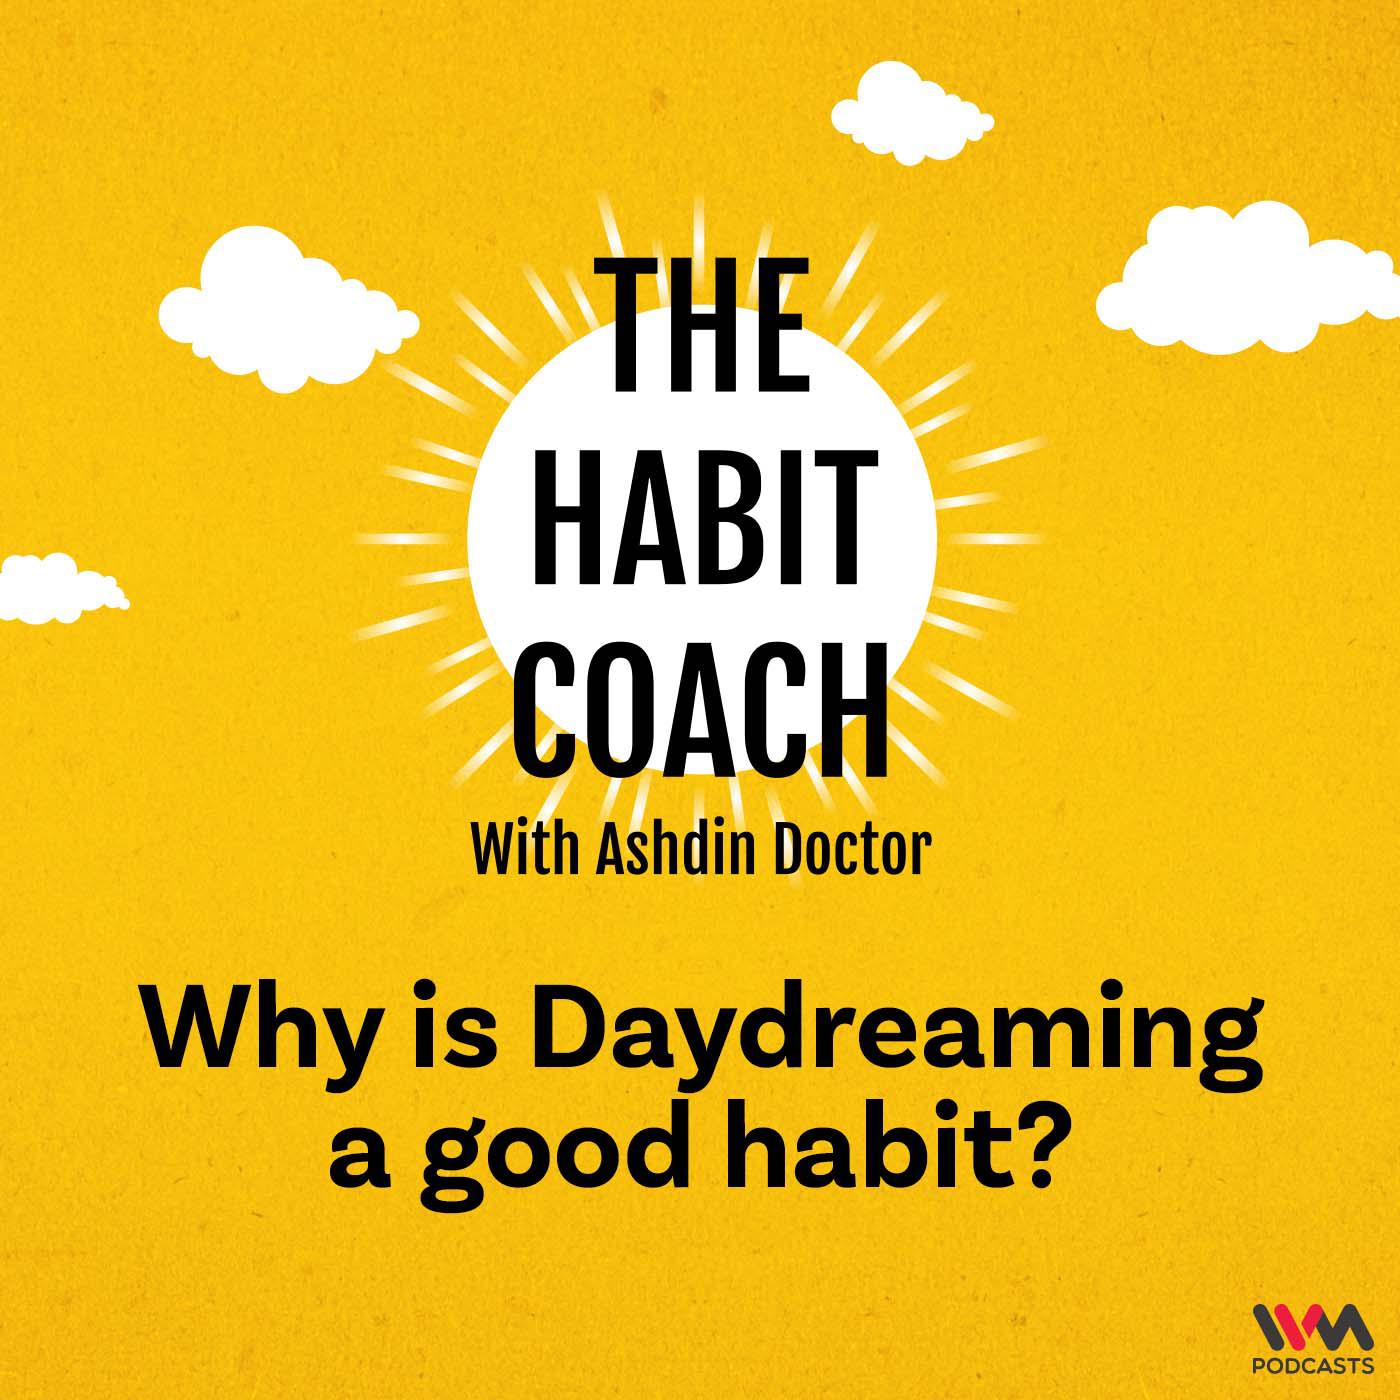 Why is Daydreaming a good habit?